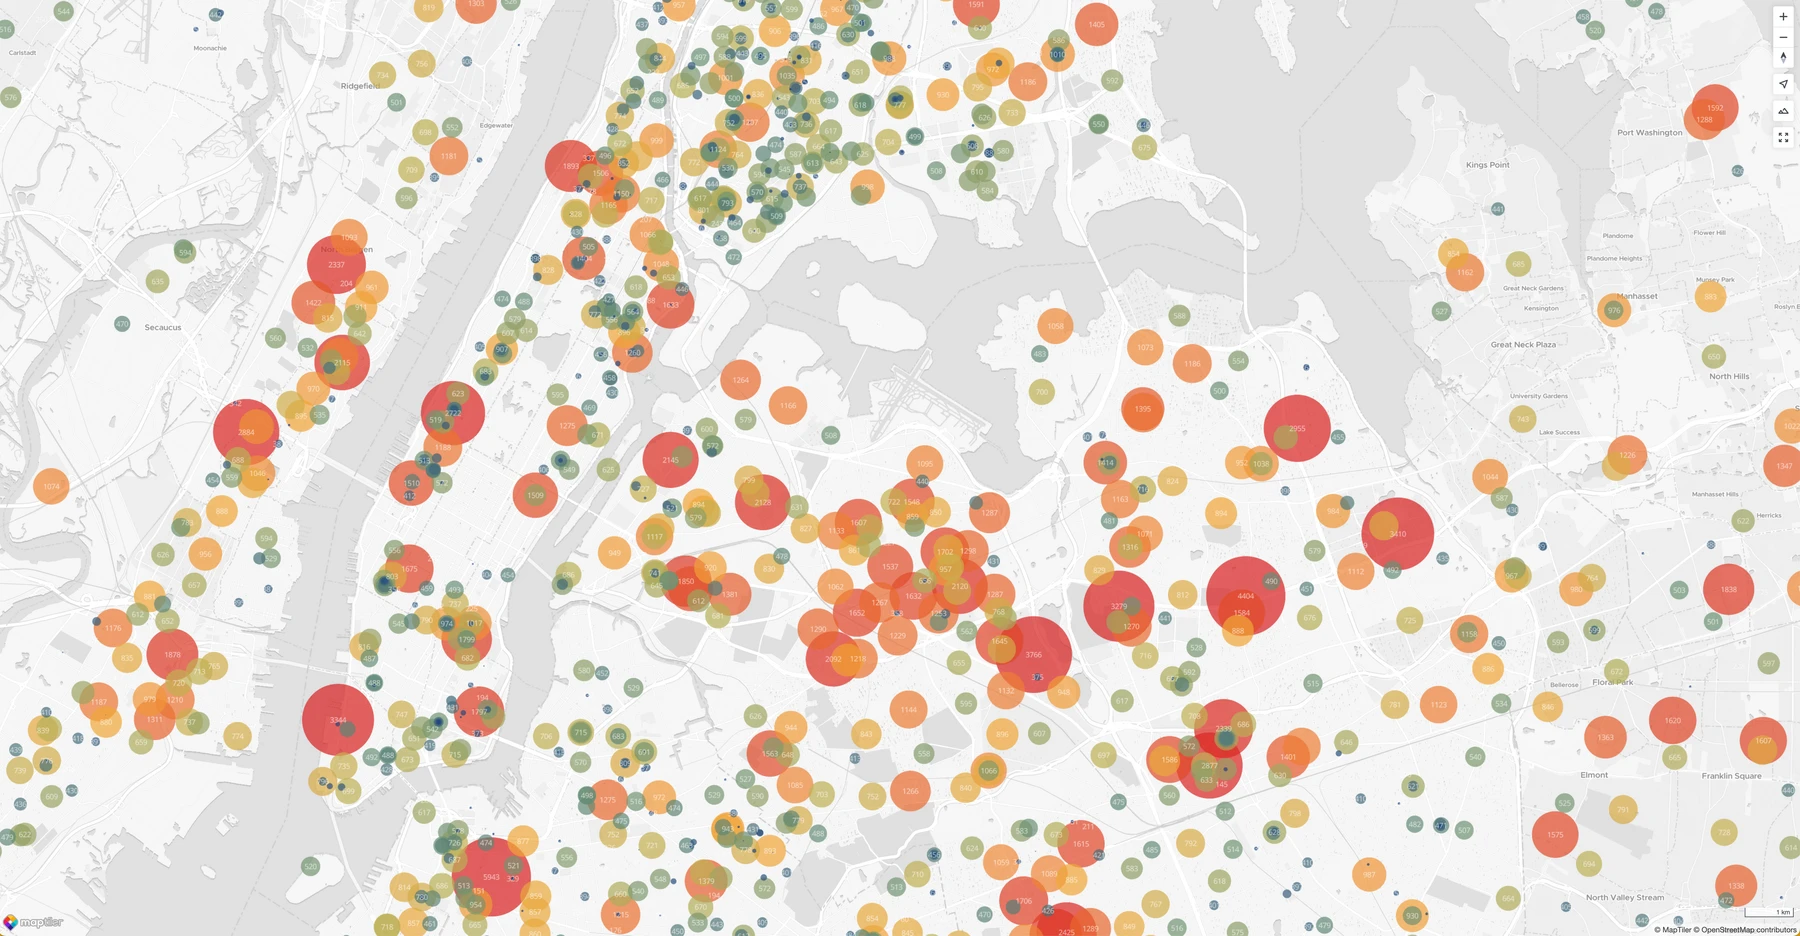 NY schools non linear exponential color ramp data visualization